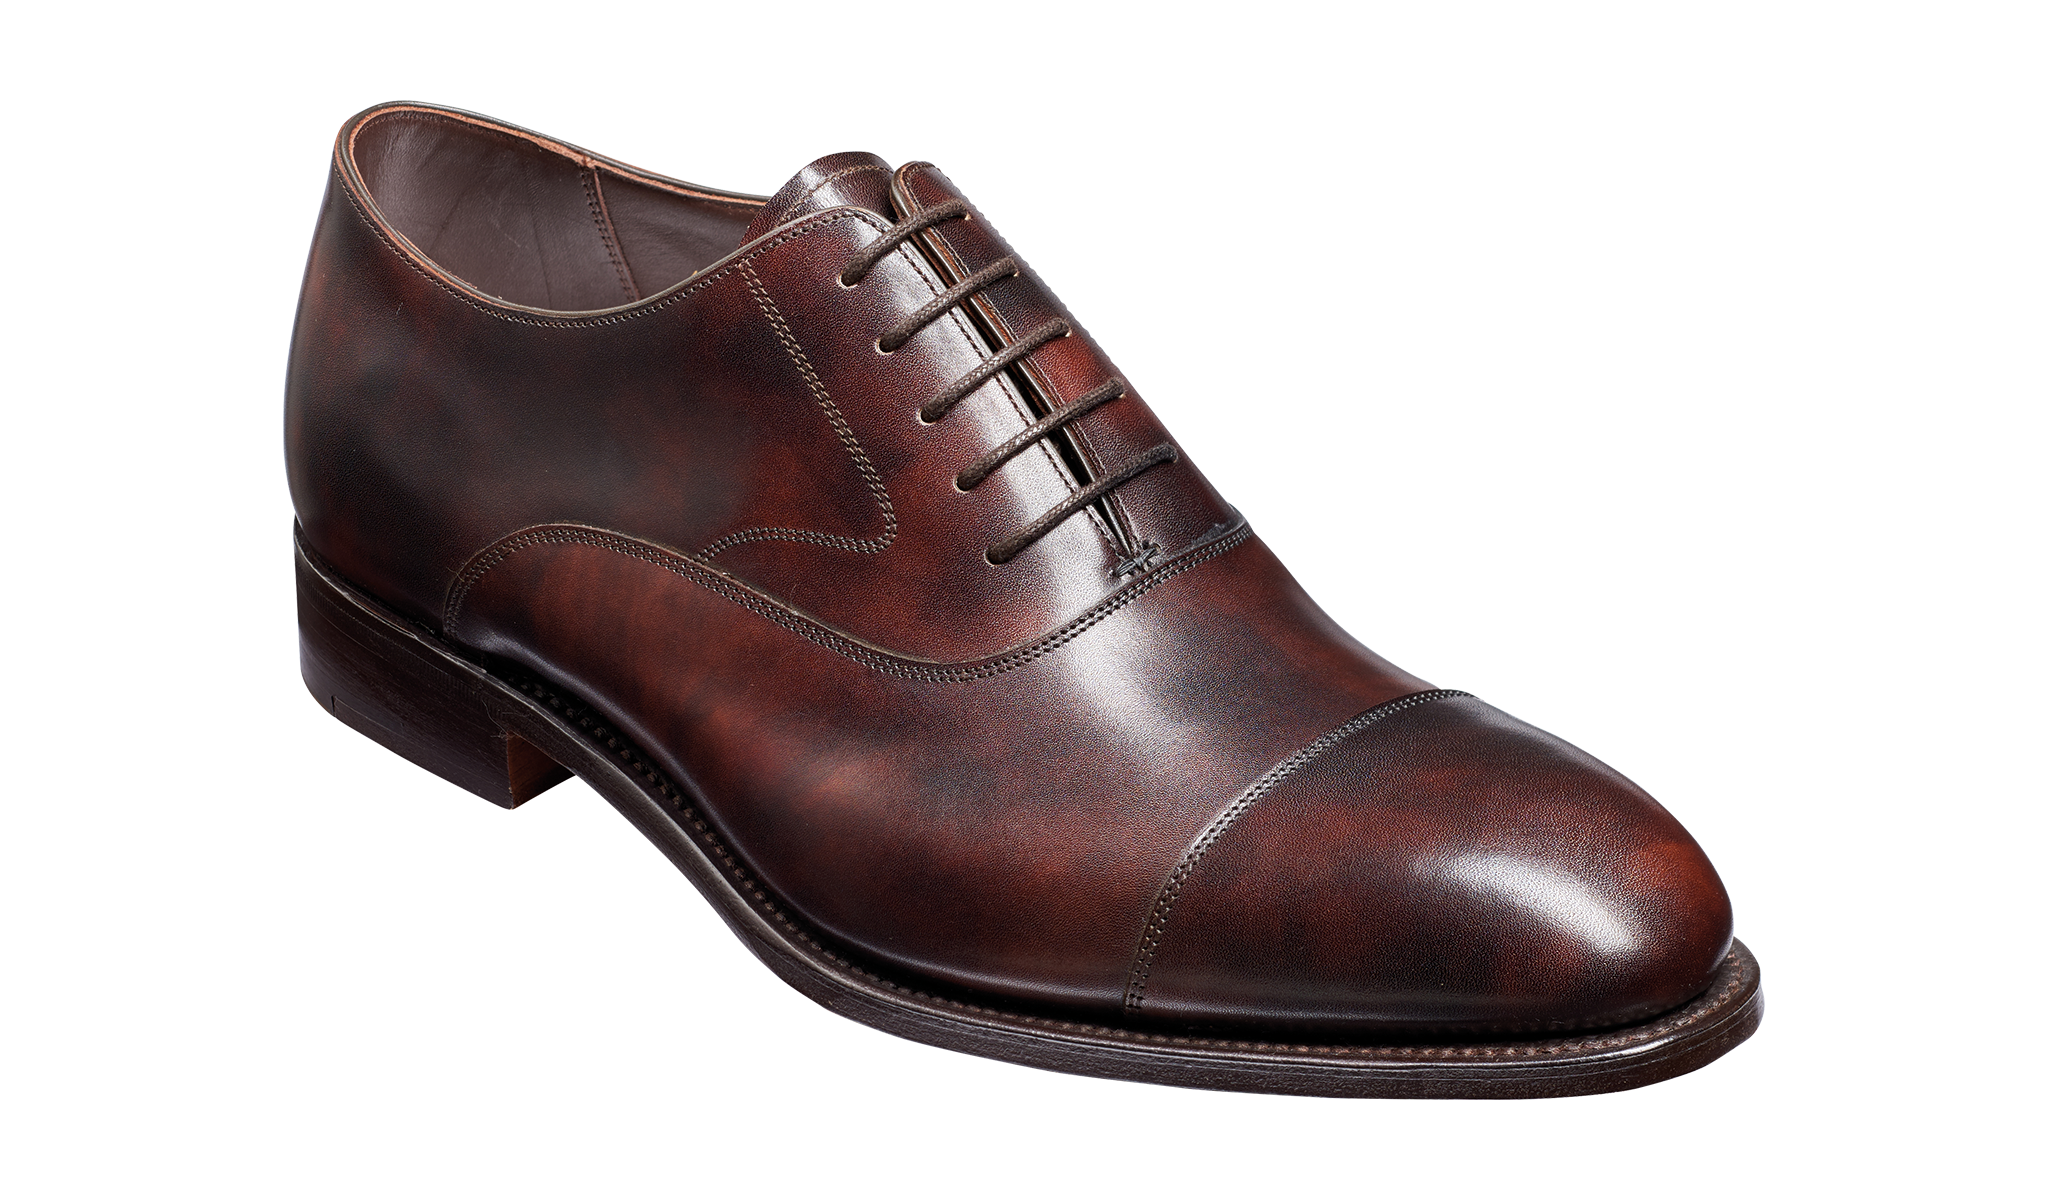 Falsgrave - A mens brown oxford shoe by Barker. 